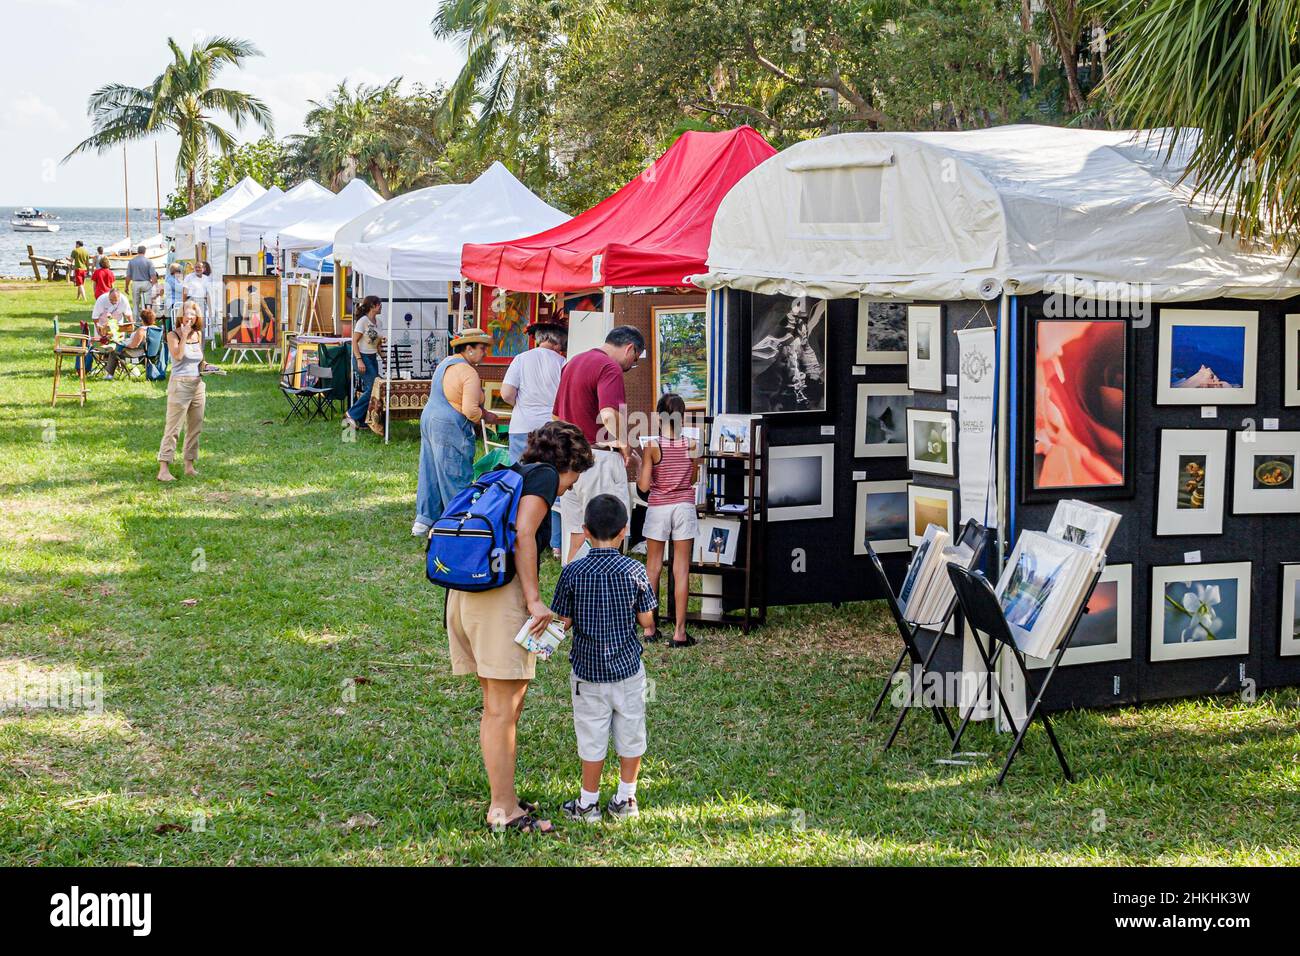 Miami Florida,Coconut Grove,The Barnacle historic State Park,Ralph Middleton Munroe home house,Mad Hatter Arts Festival fair art artwork booths event Stock Photo